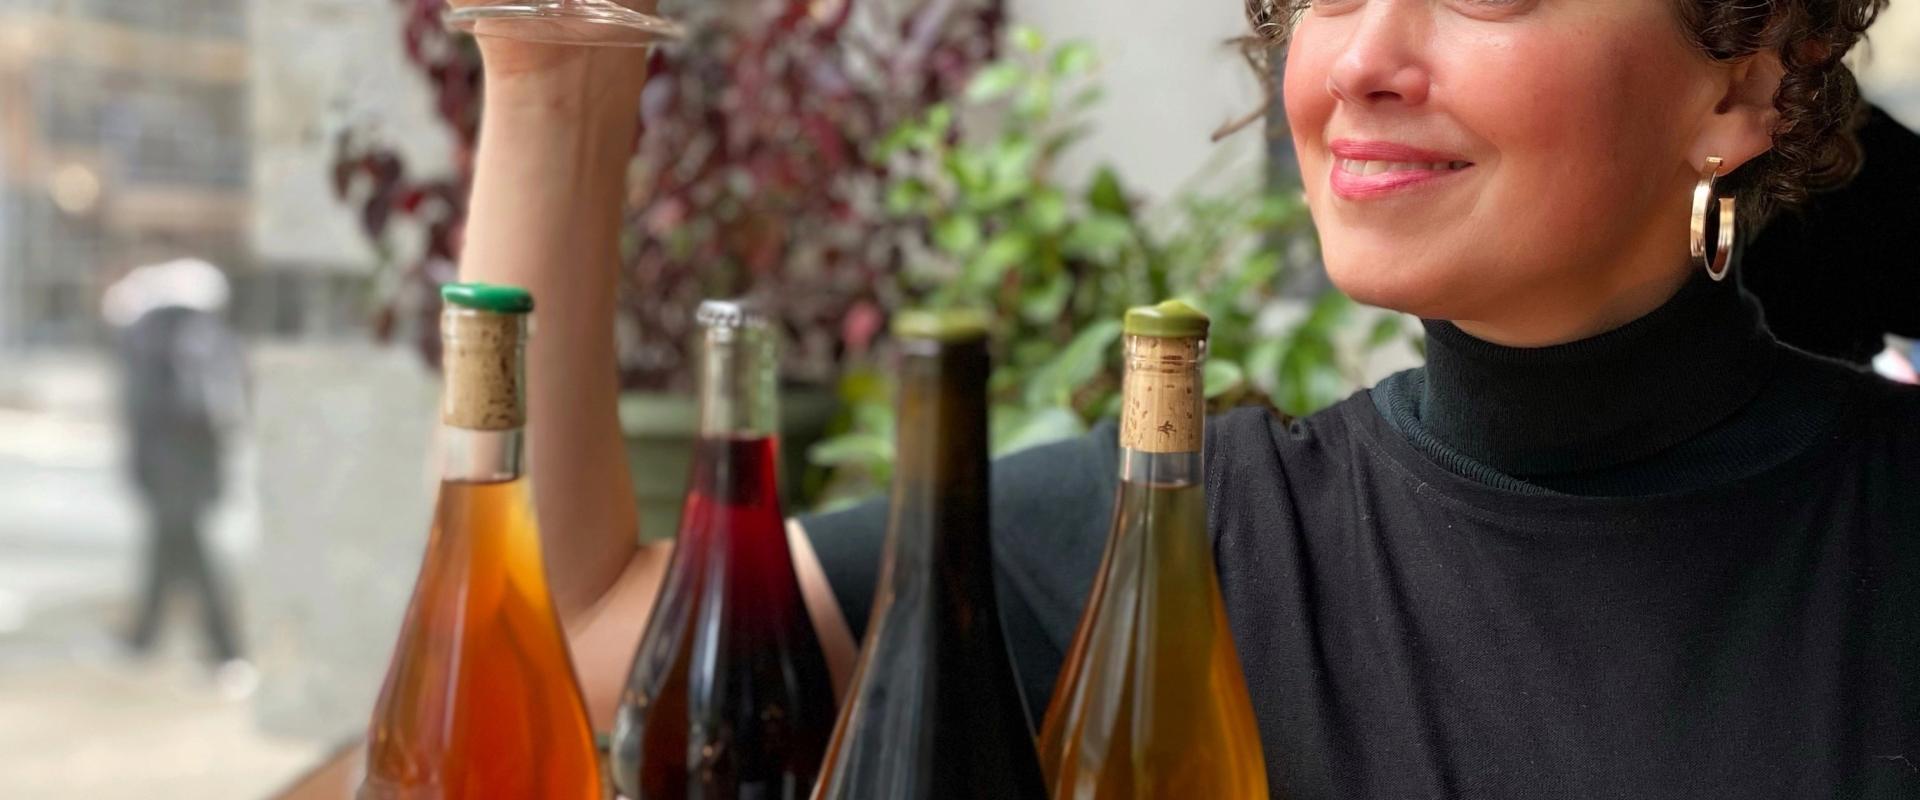 Heather Rankin holding a glass of wine, with 4 Lieux Communs wine bottles sitting on the ledge in front of her. 